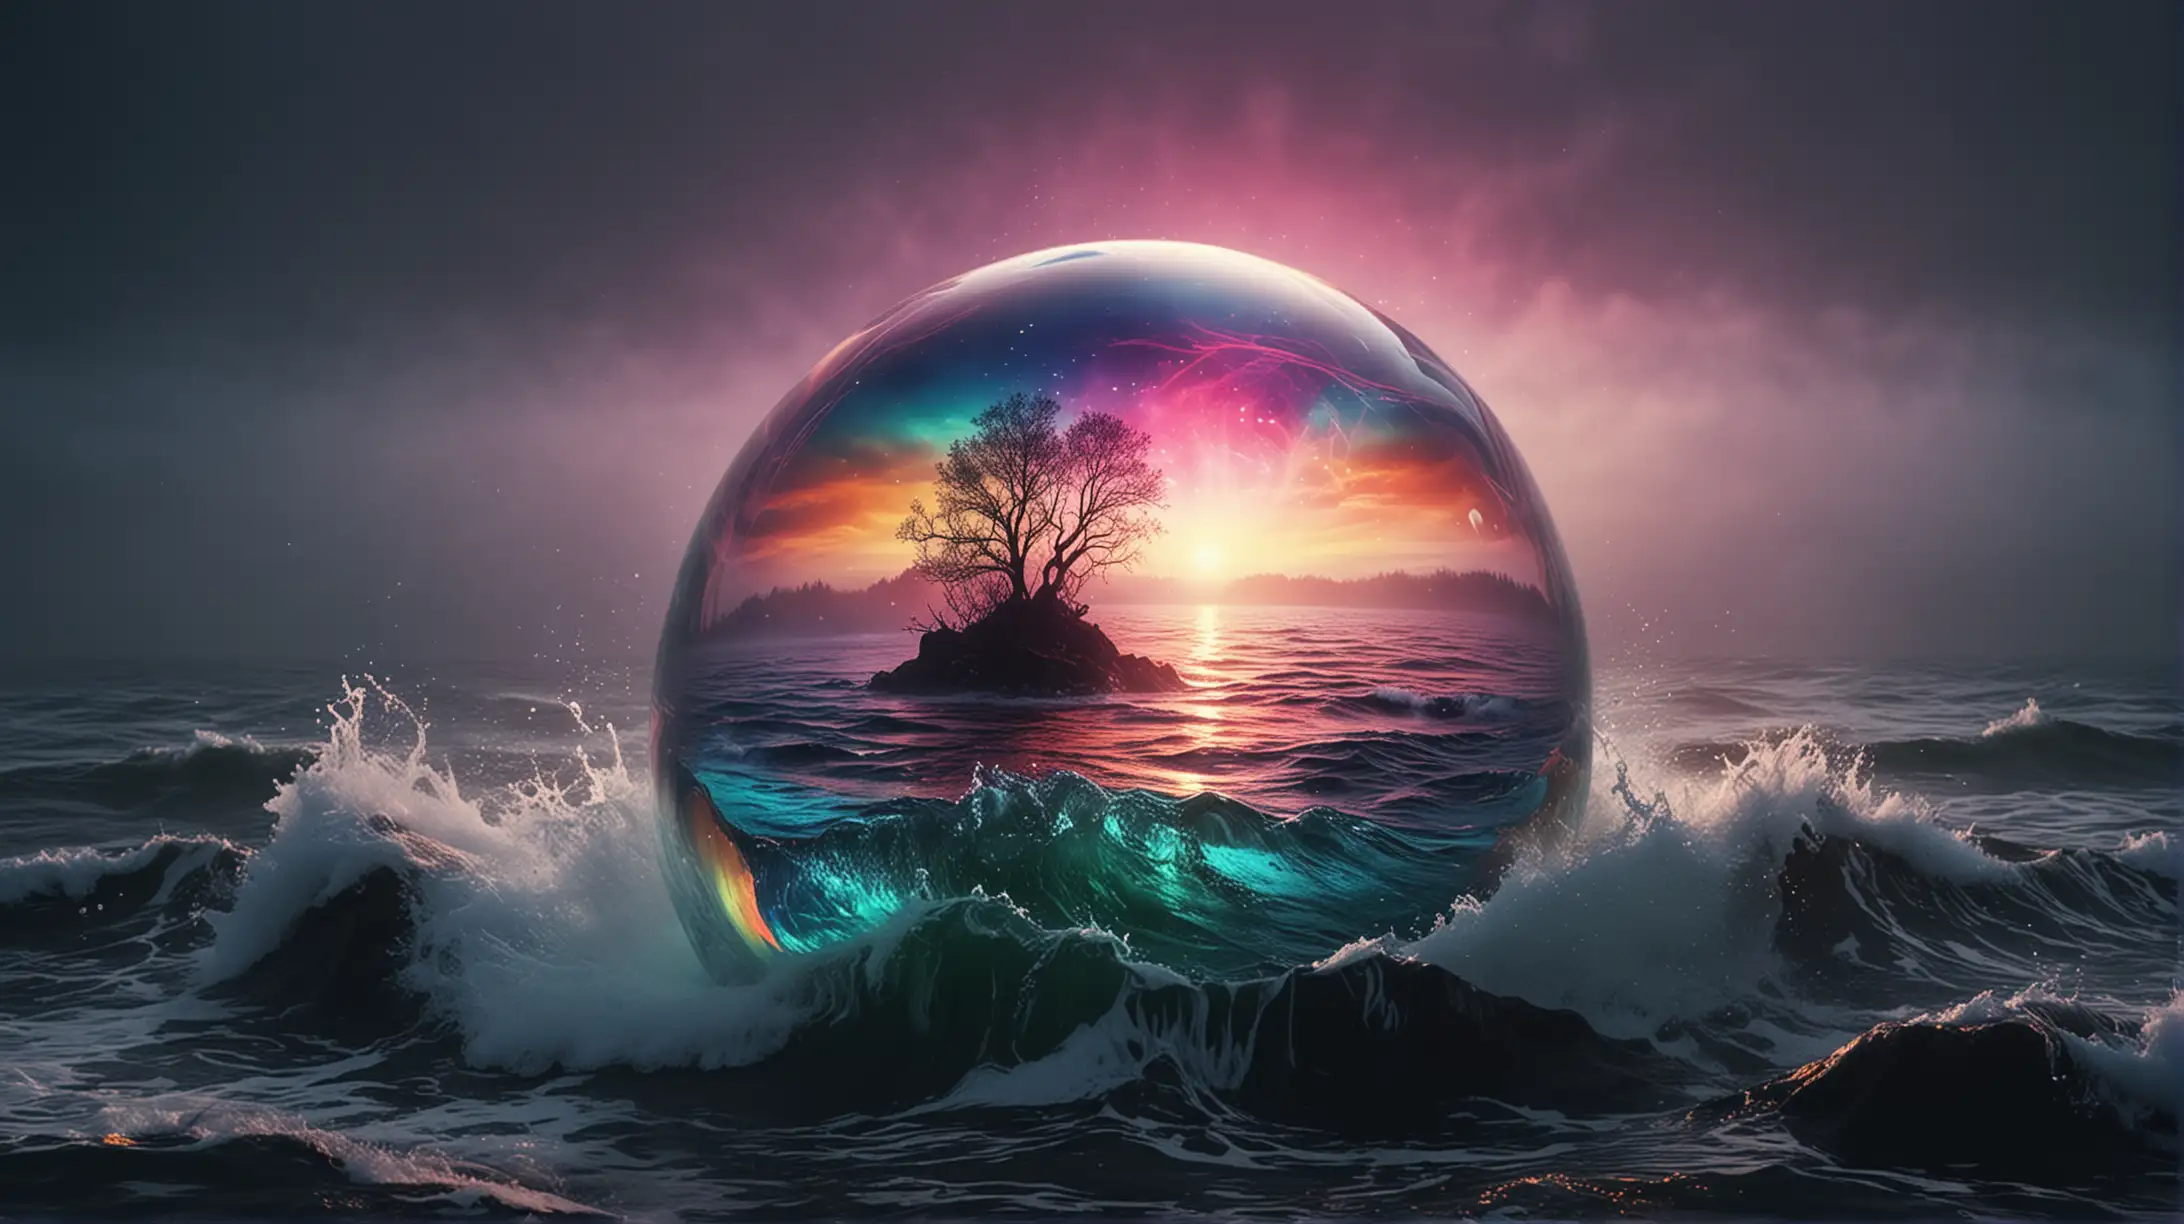 Psychedelic Vision Colorful Transparent Sphere Falls into Troubled Sea at Night